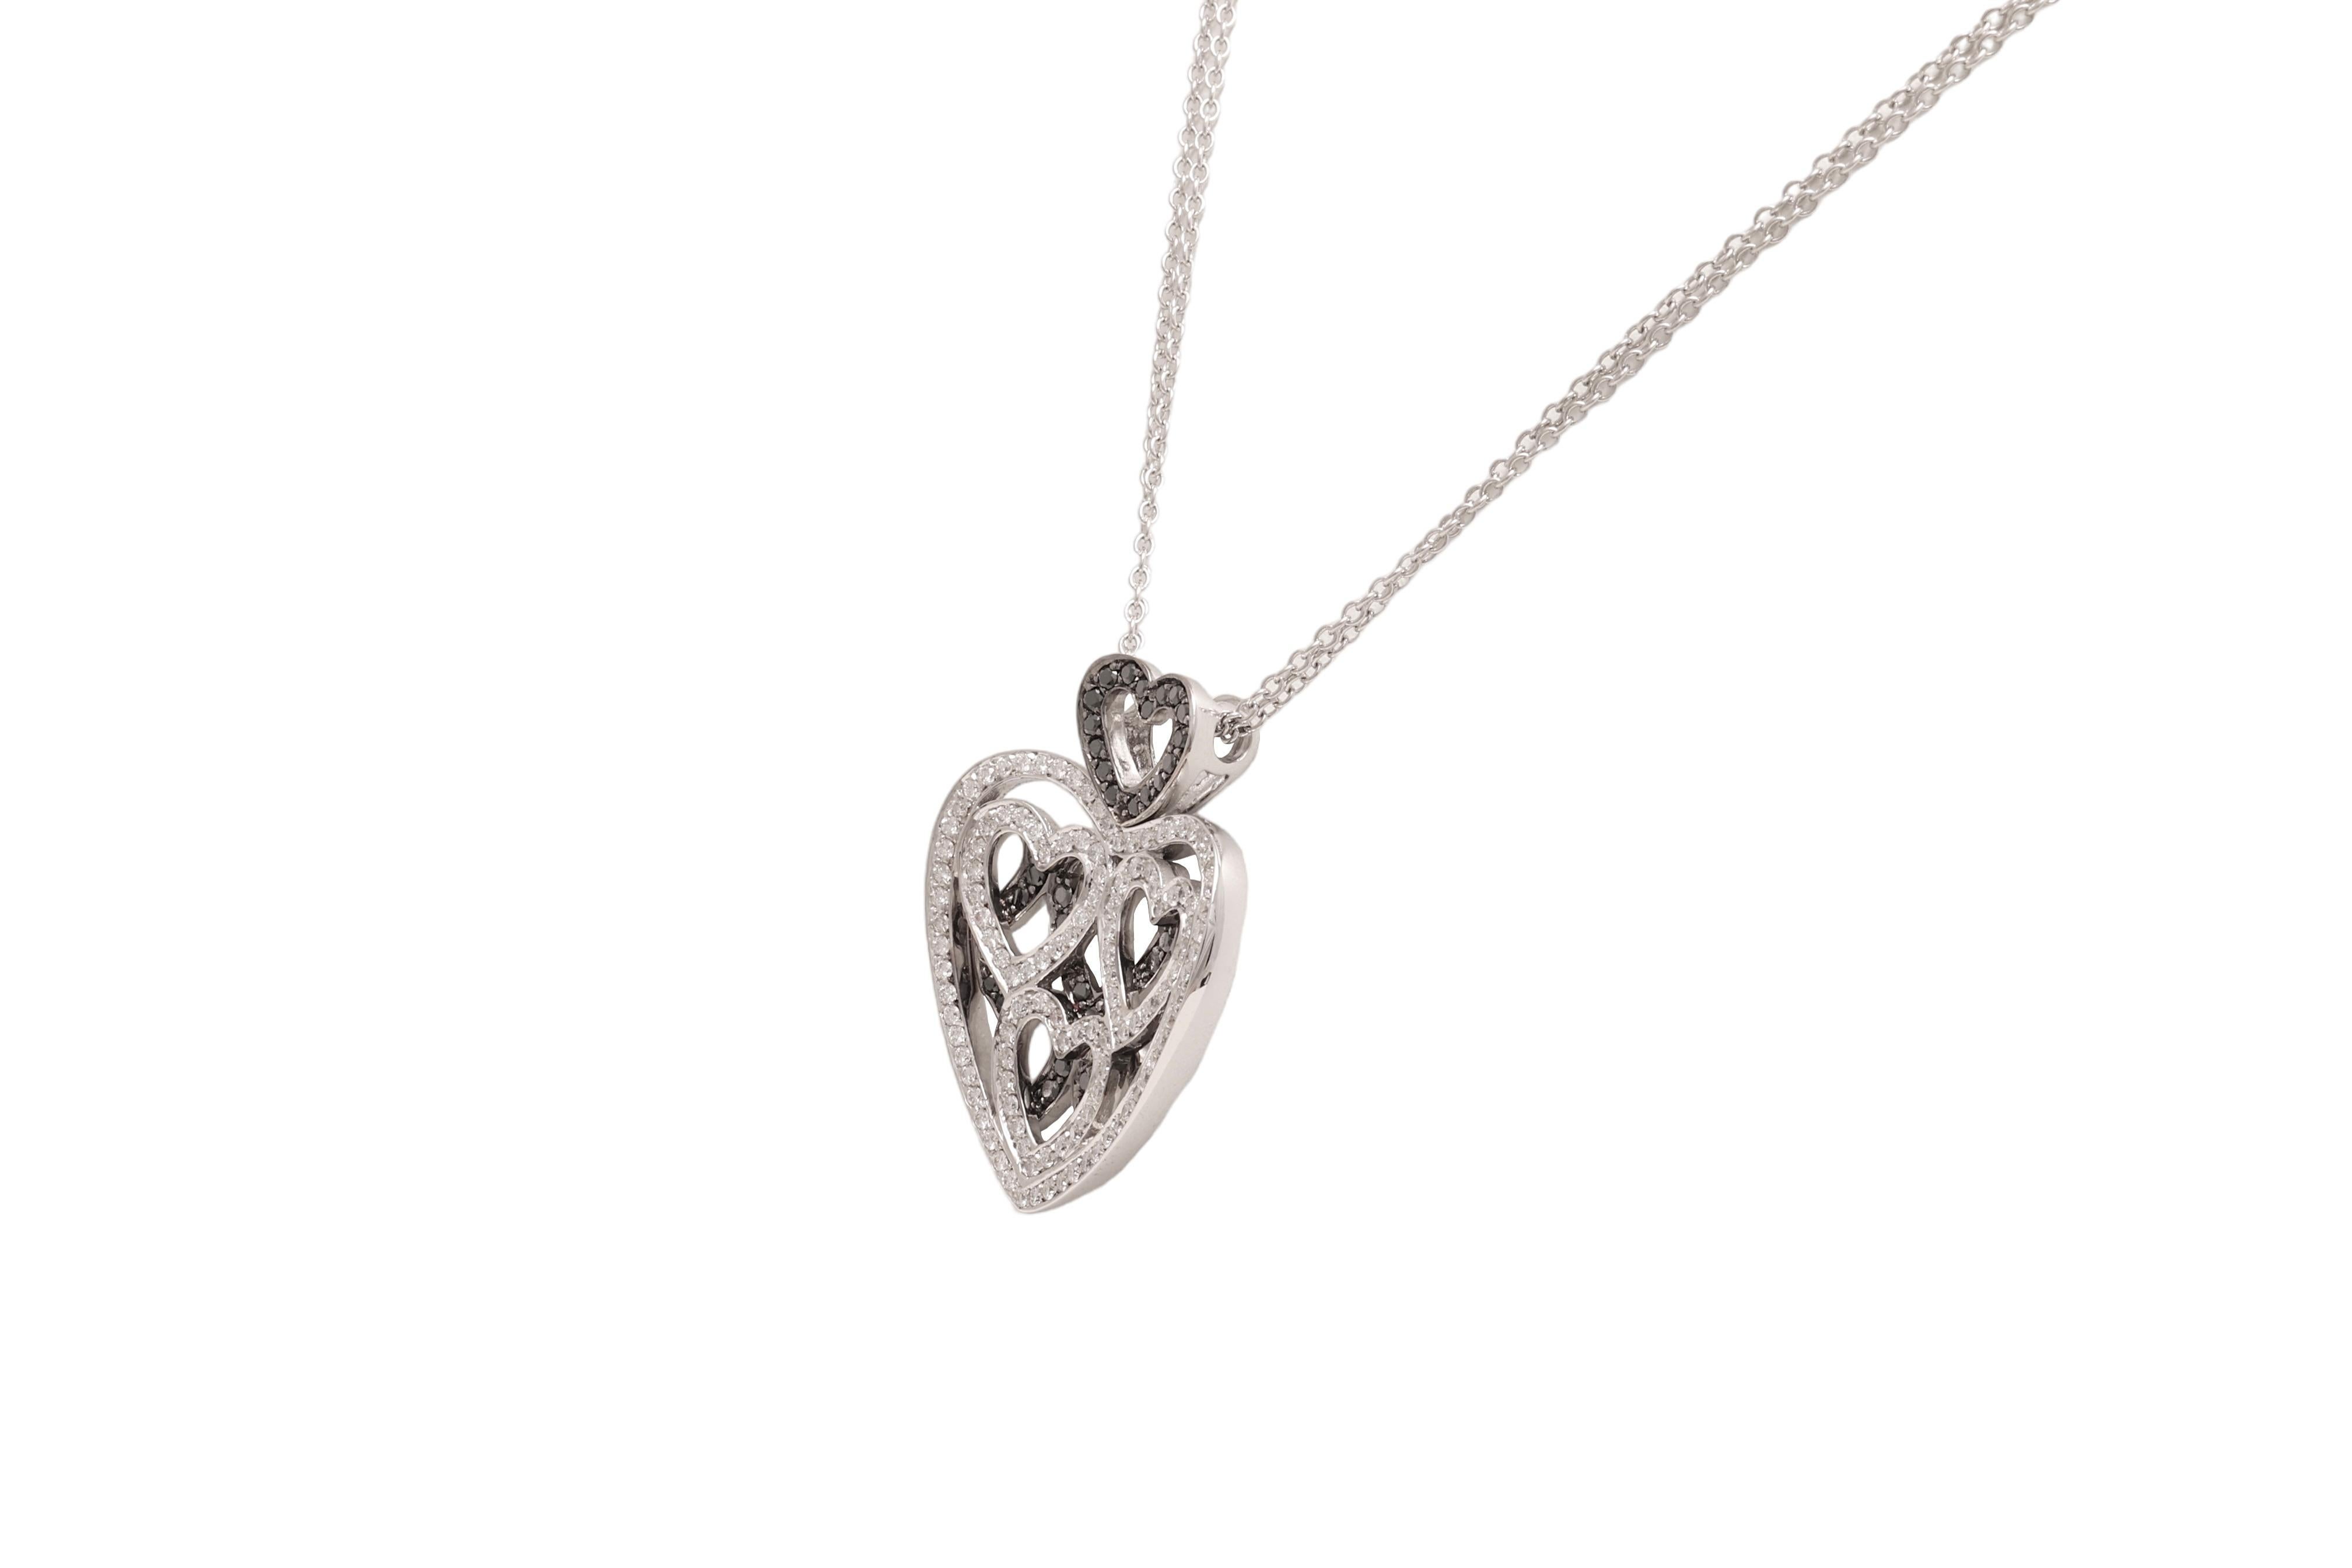 Brilliant Cut  18 kt. White Gold Heart Necklace With 1 ct. White & Black Diamonds  For Sale